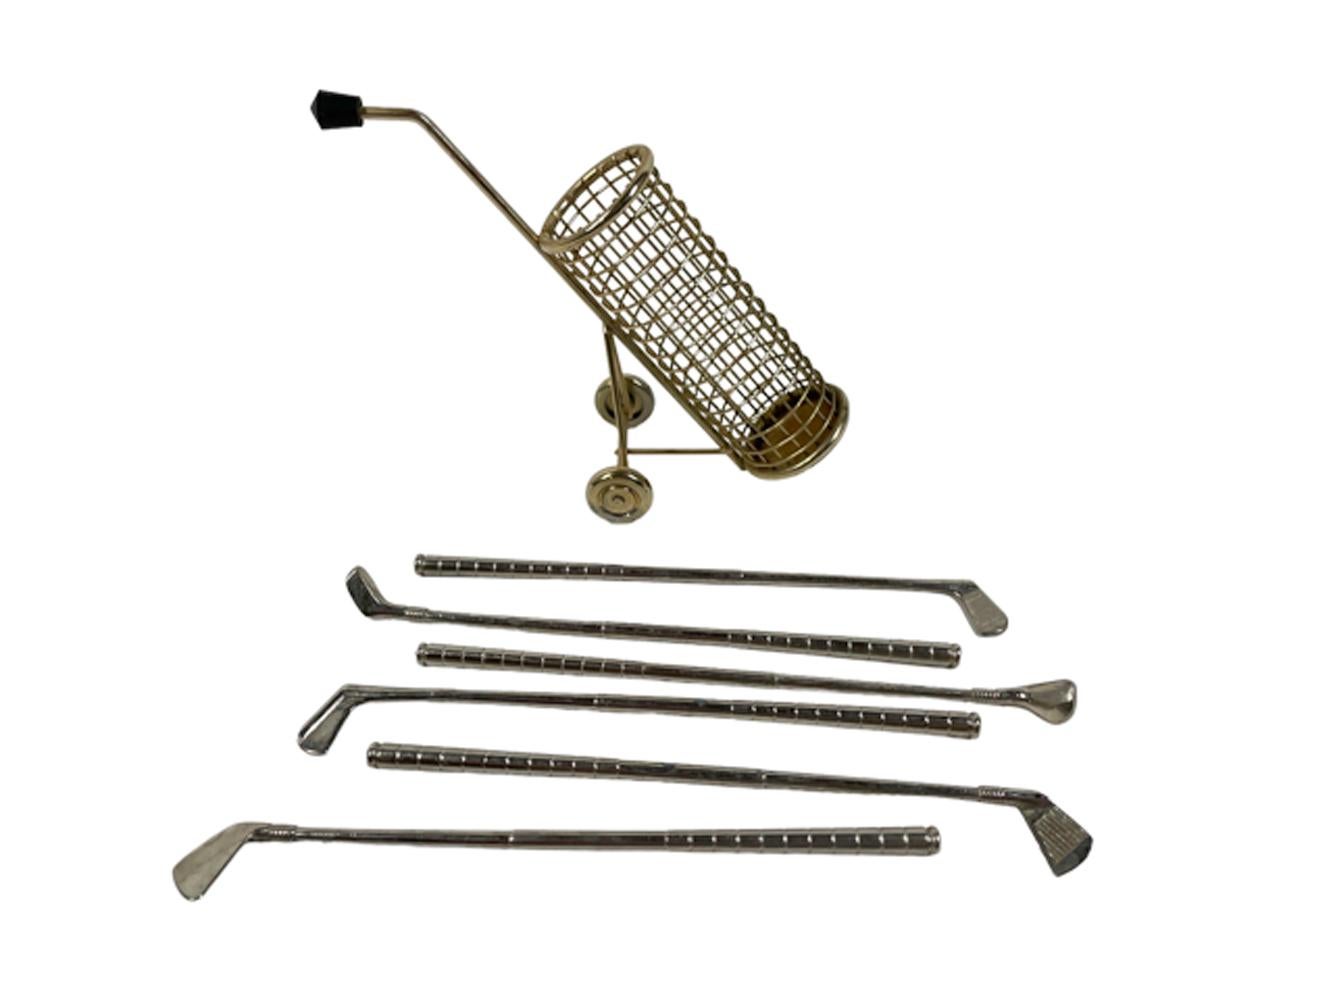 Vintage golf themed swizzle stick / cocktail stirrer / muddler set. Six stainless golf club stirrers/muddlers with a gold tone golf bag of wire mesh and resting on a pair of wheels. 